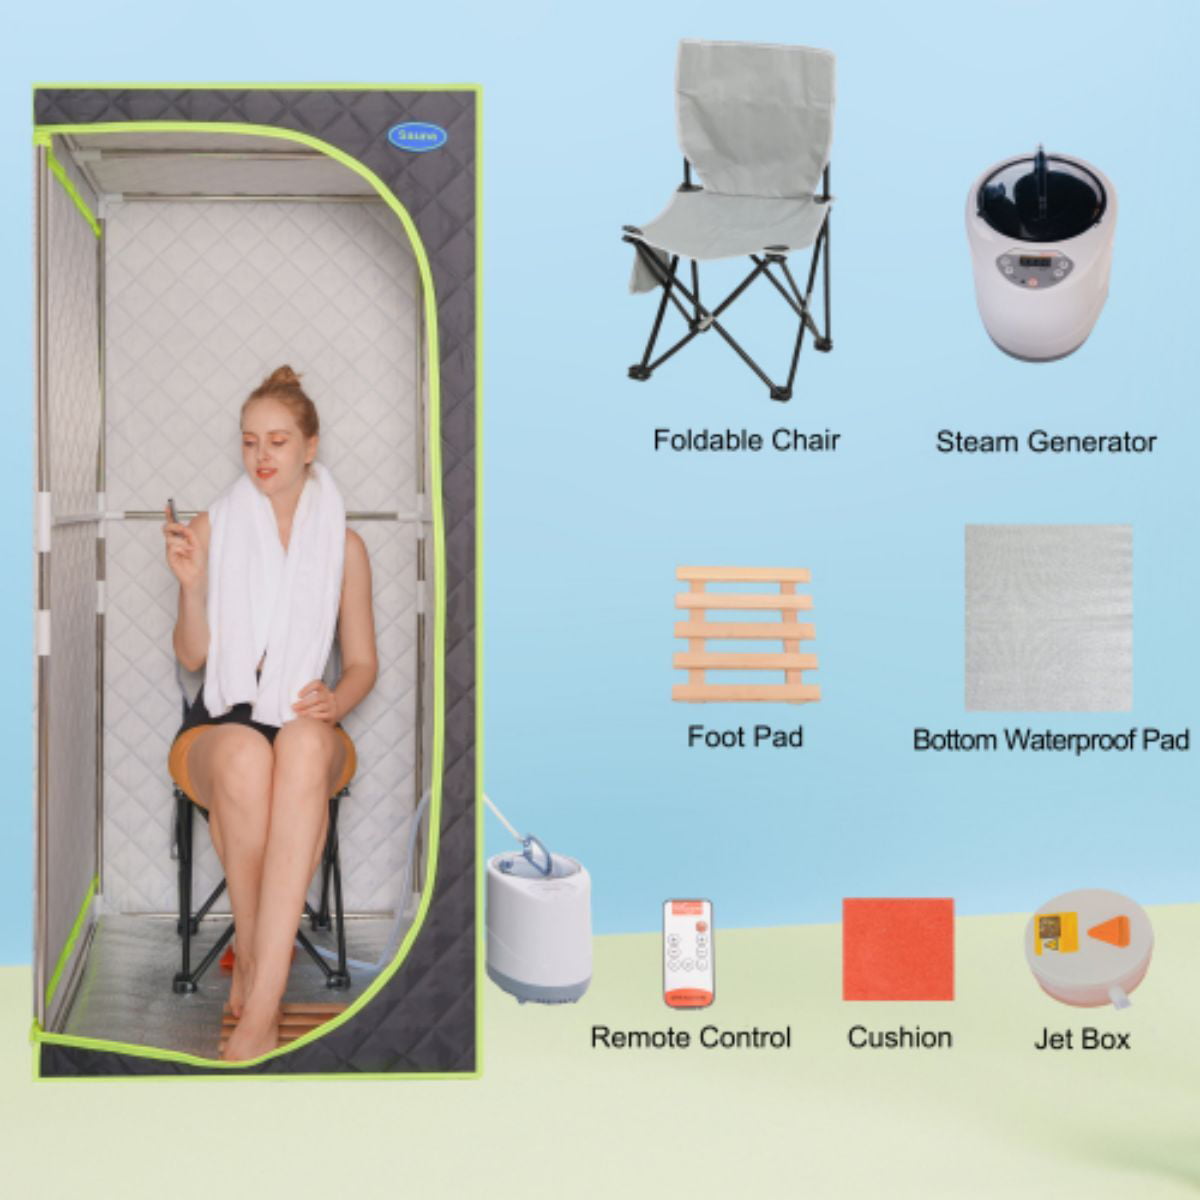 Infrared,Black spikerking Portable Infrared Sauna for Home Full Size Black Infrared Sauna Tent for Spa with Heating Foot Pad and Portable Chair 